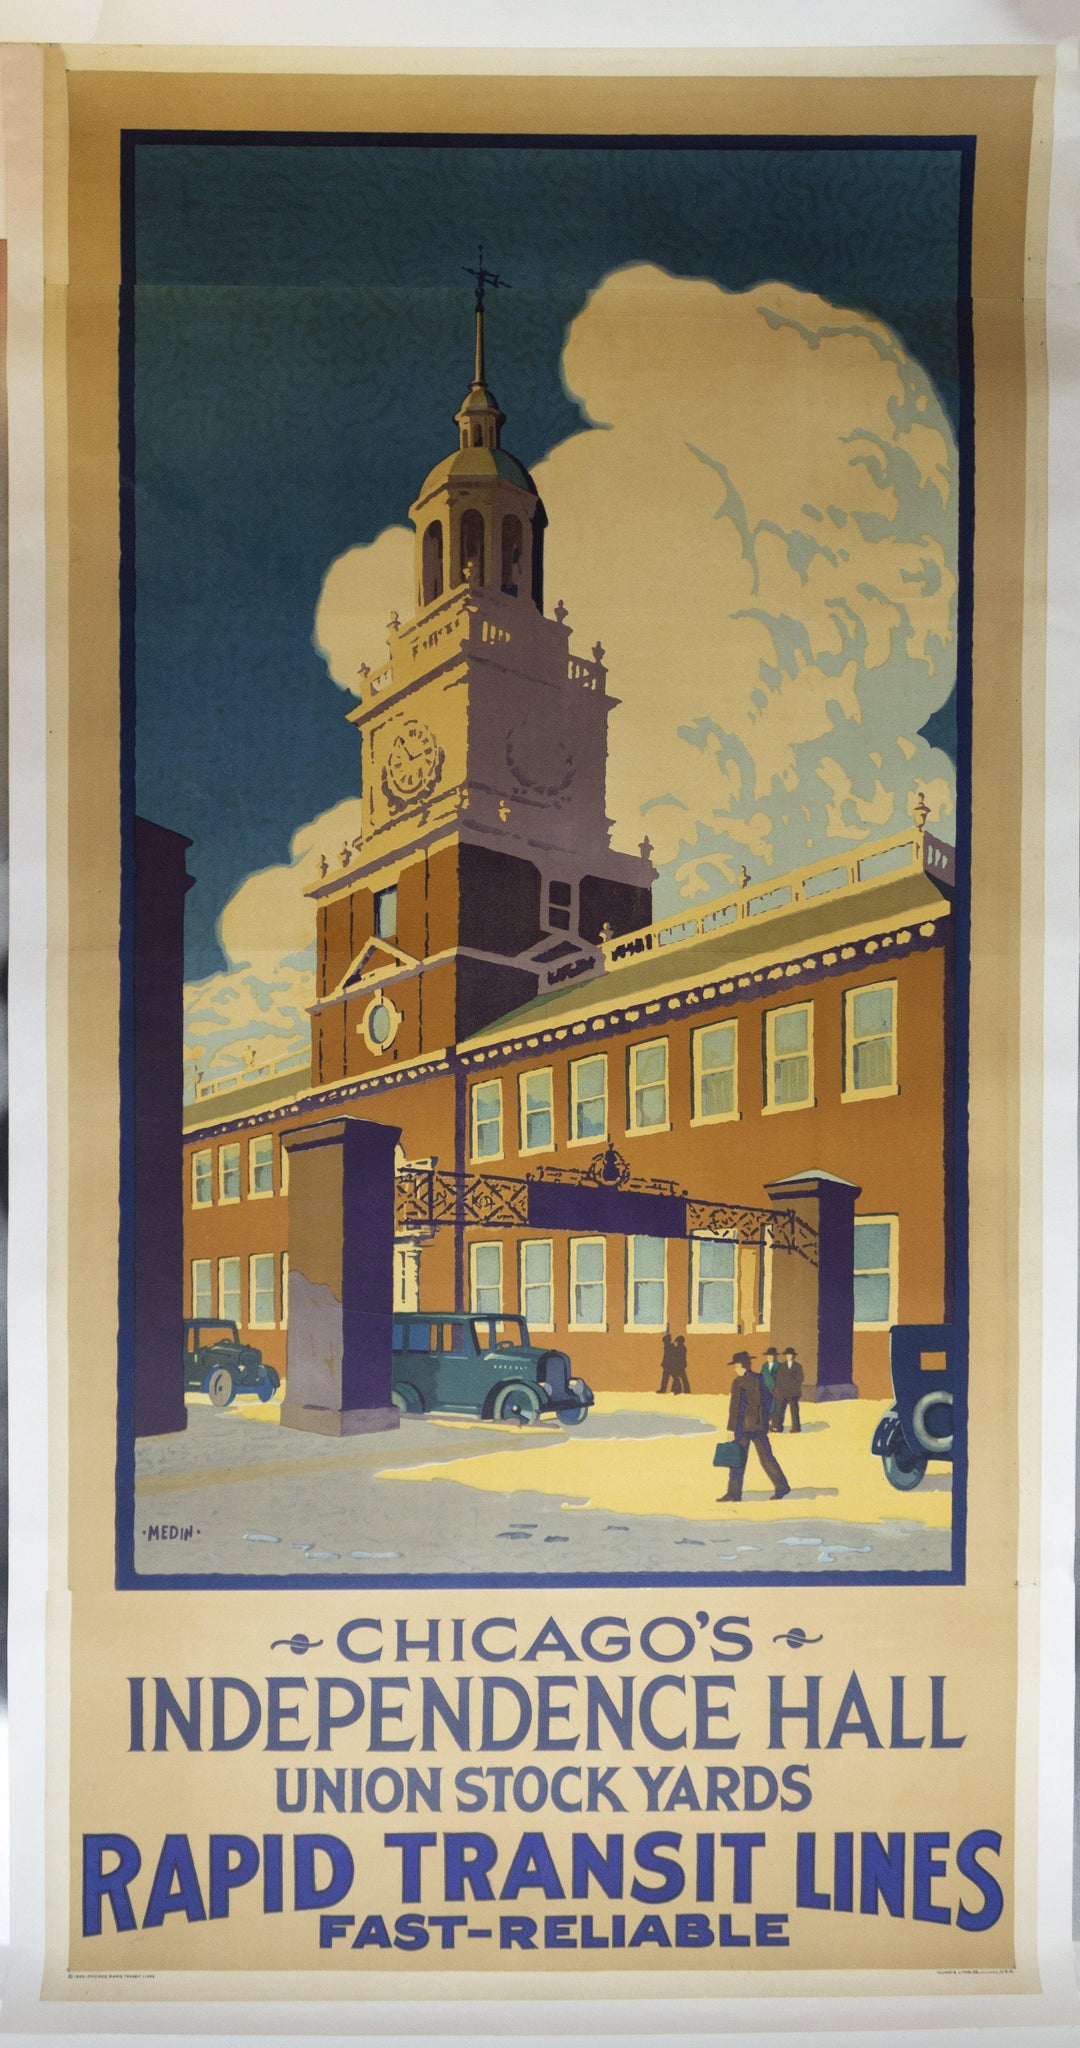 1926 Chicago Rapid Transit Lines Union Stock Yards by Charles B Medin - Golden Age Posters